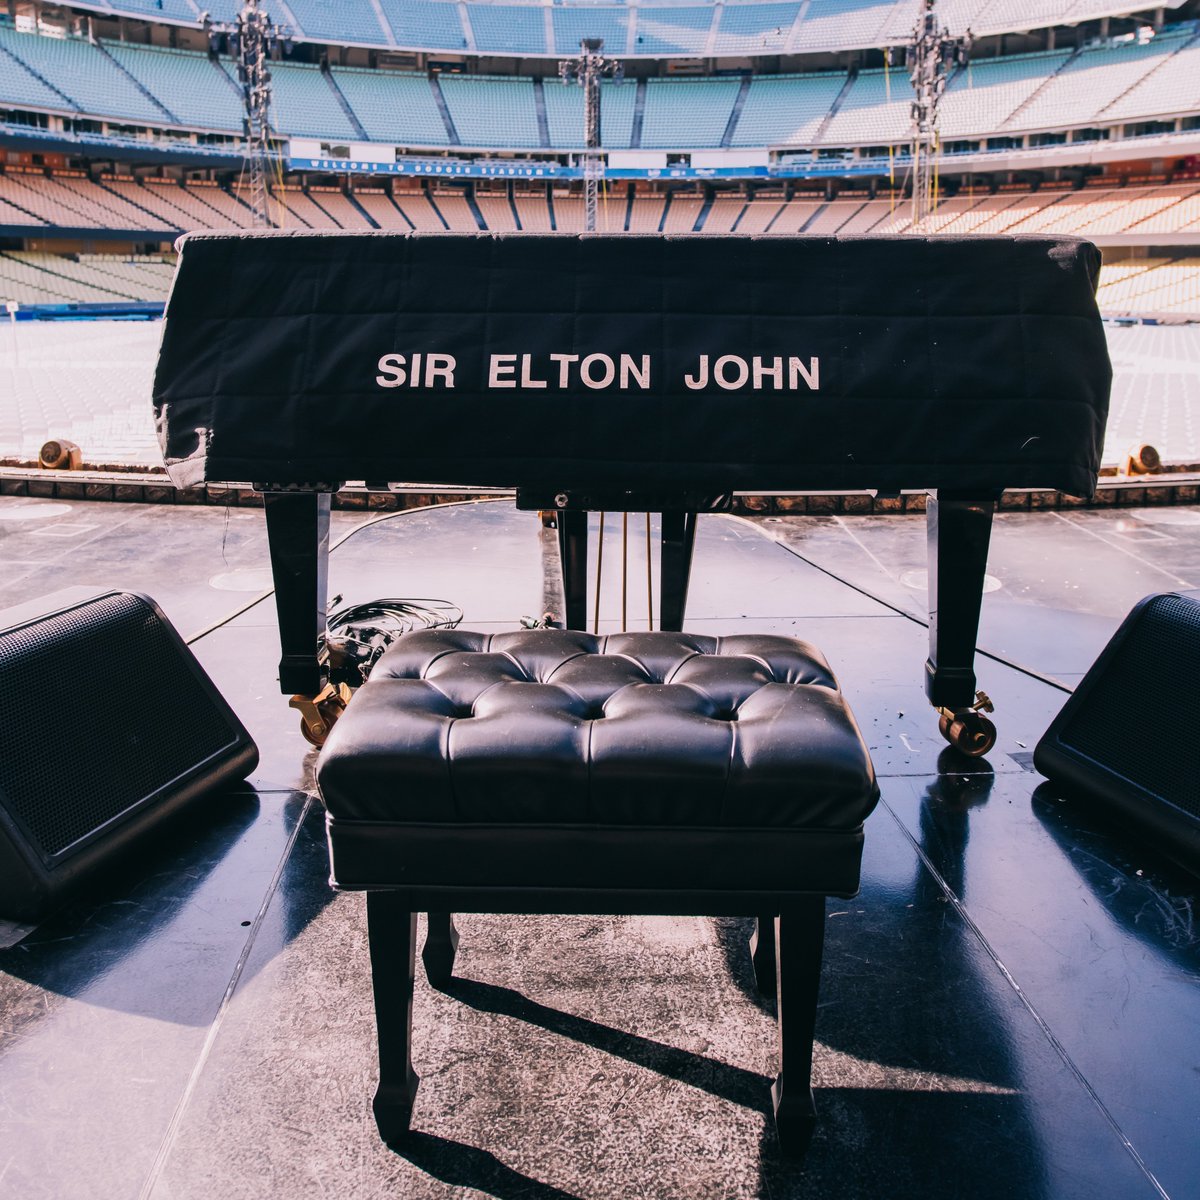 Here’s your front-row seat to the #EltonFarewellTour. 🤩 #EltonLive

Elton John Live: Farewell from Dodger Stadium is streaming live NOW, only on #DisneyPlus: di.sn/6000M2fpr